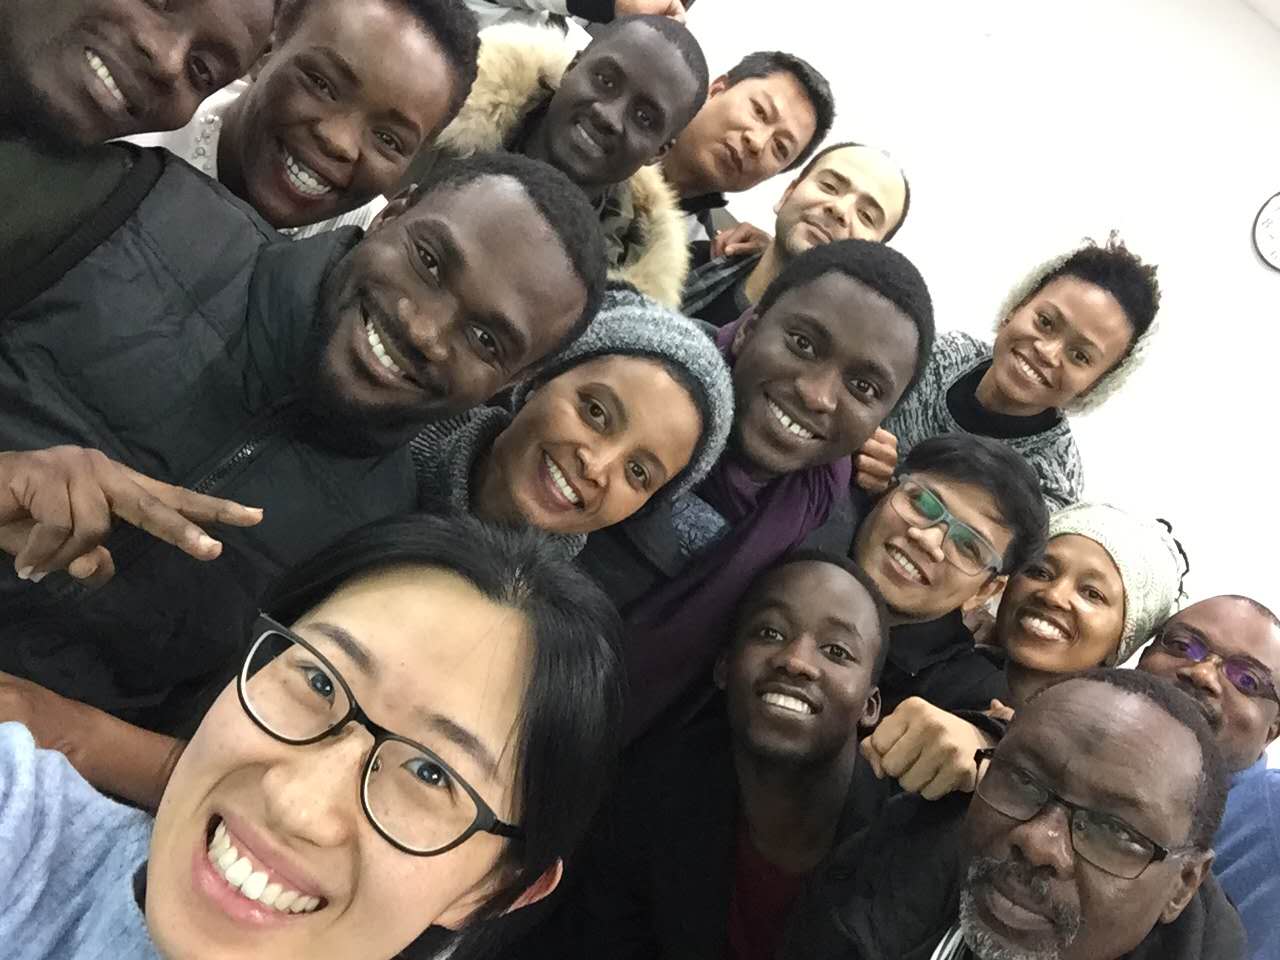 The group selfie was our Renmin University Masters class with our Laoshi...